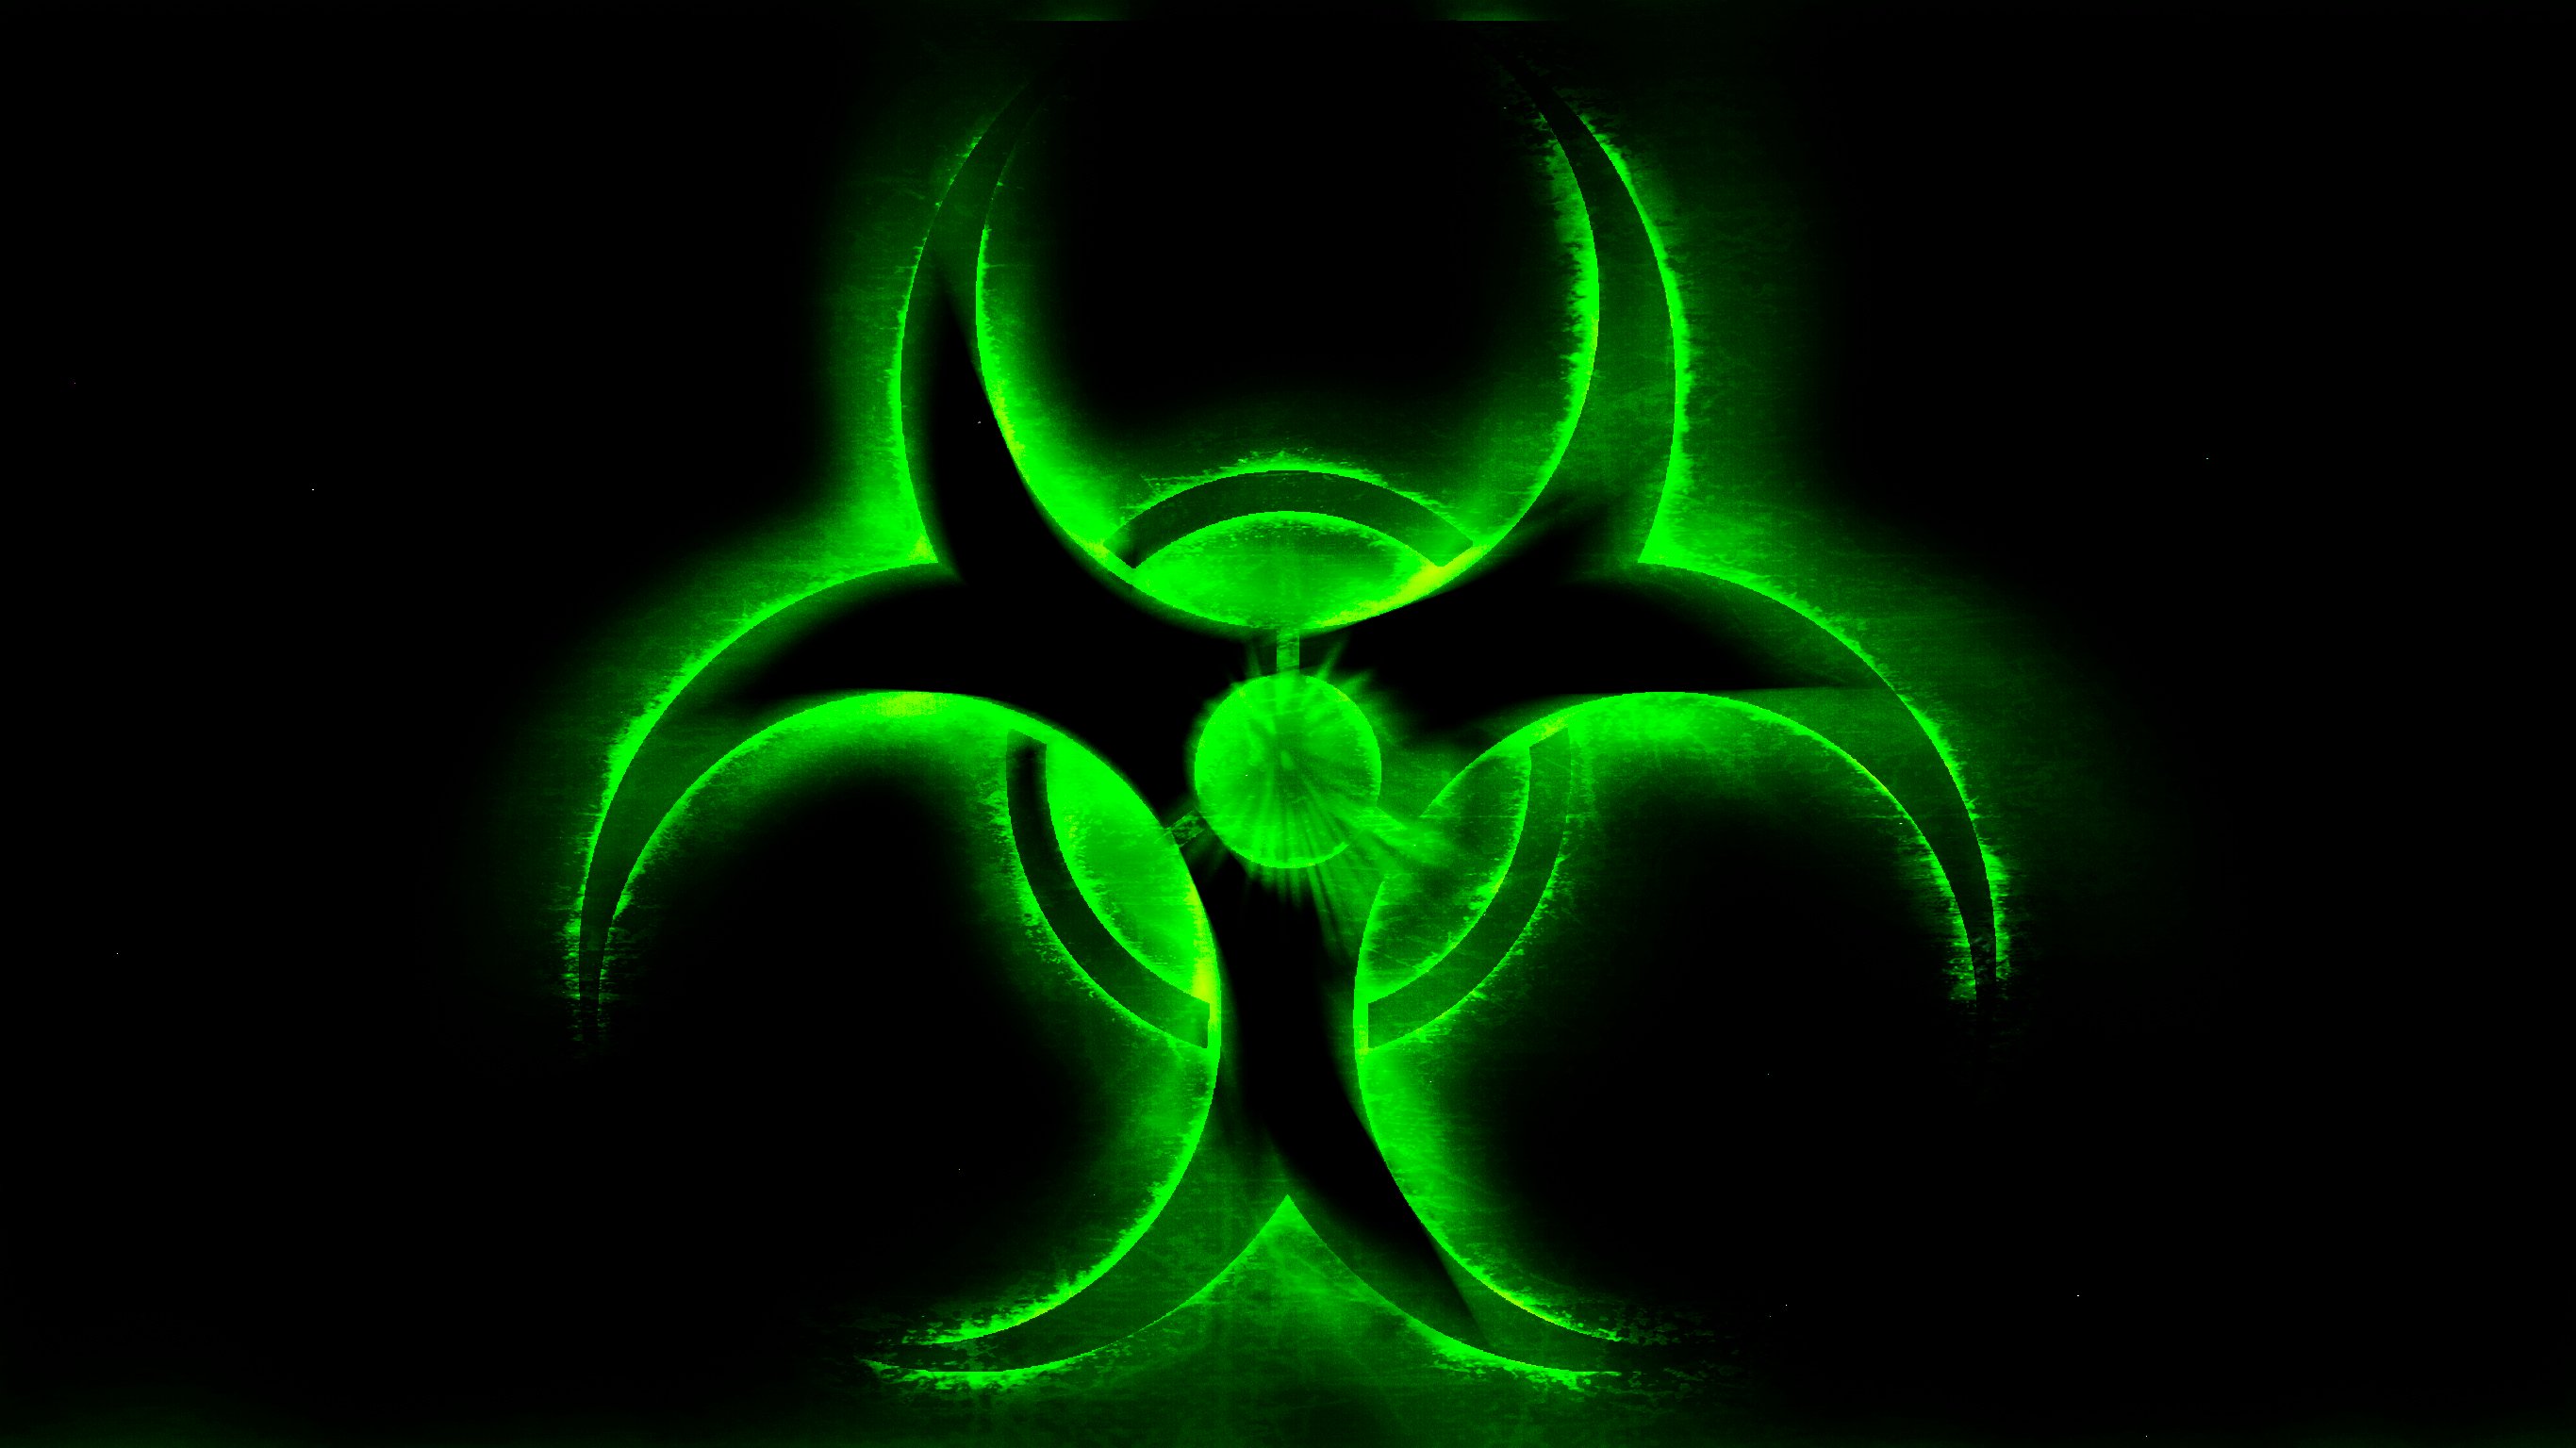 BIOHAZARD Toxic Green by Space Project712 on